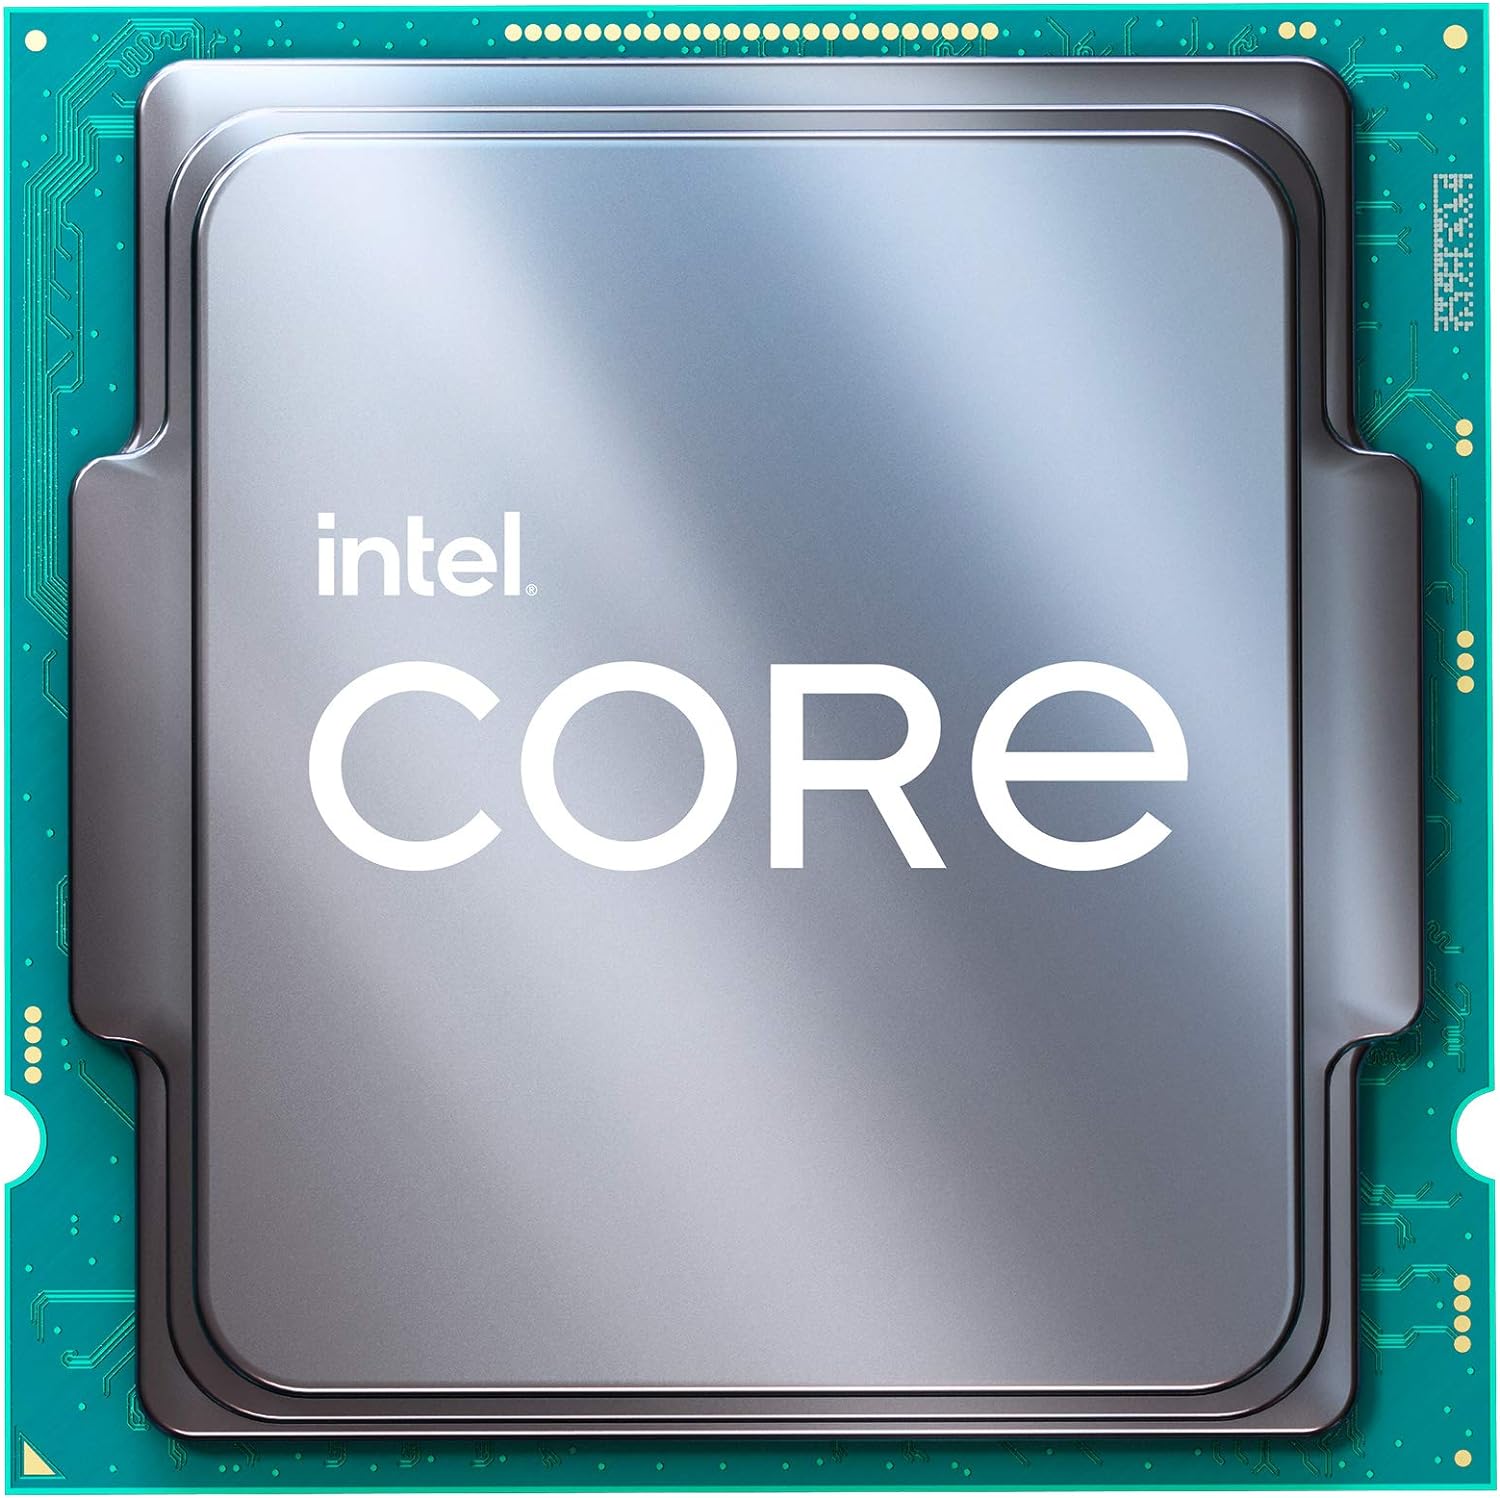 Intel® Core™ i5-11400 Desktop Processor 2.6 GHz Cores up to 4.4 GHz LGA1200 (Intel® 500 Series  Select 400 Series Chipset) 65W